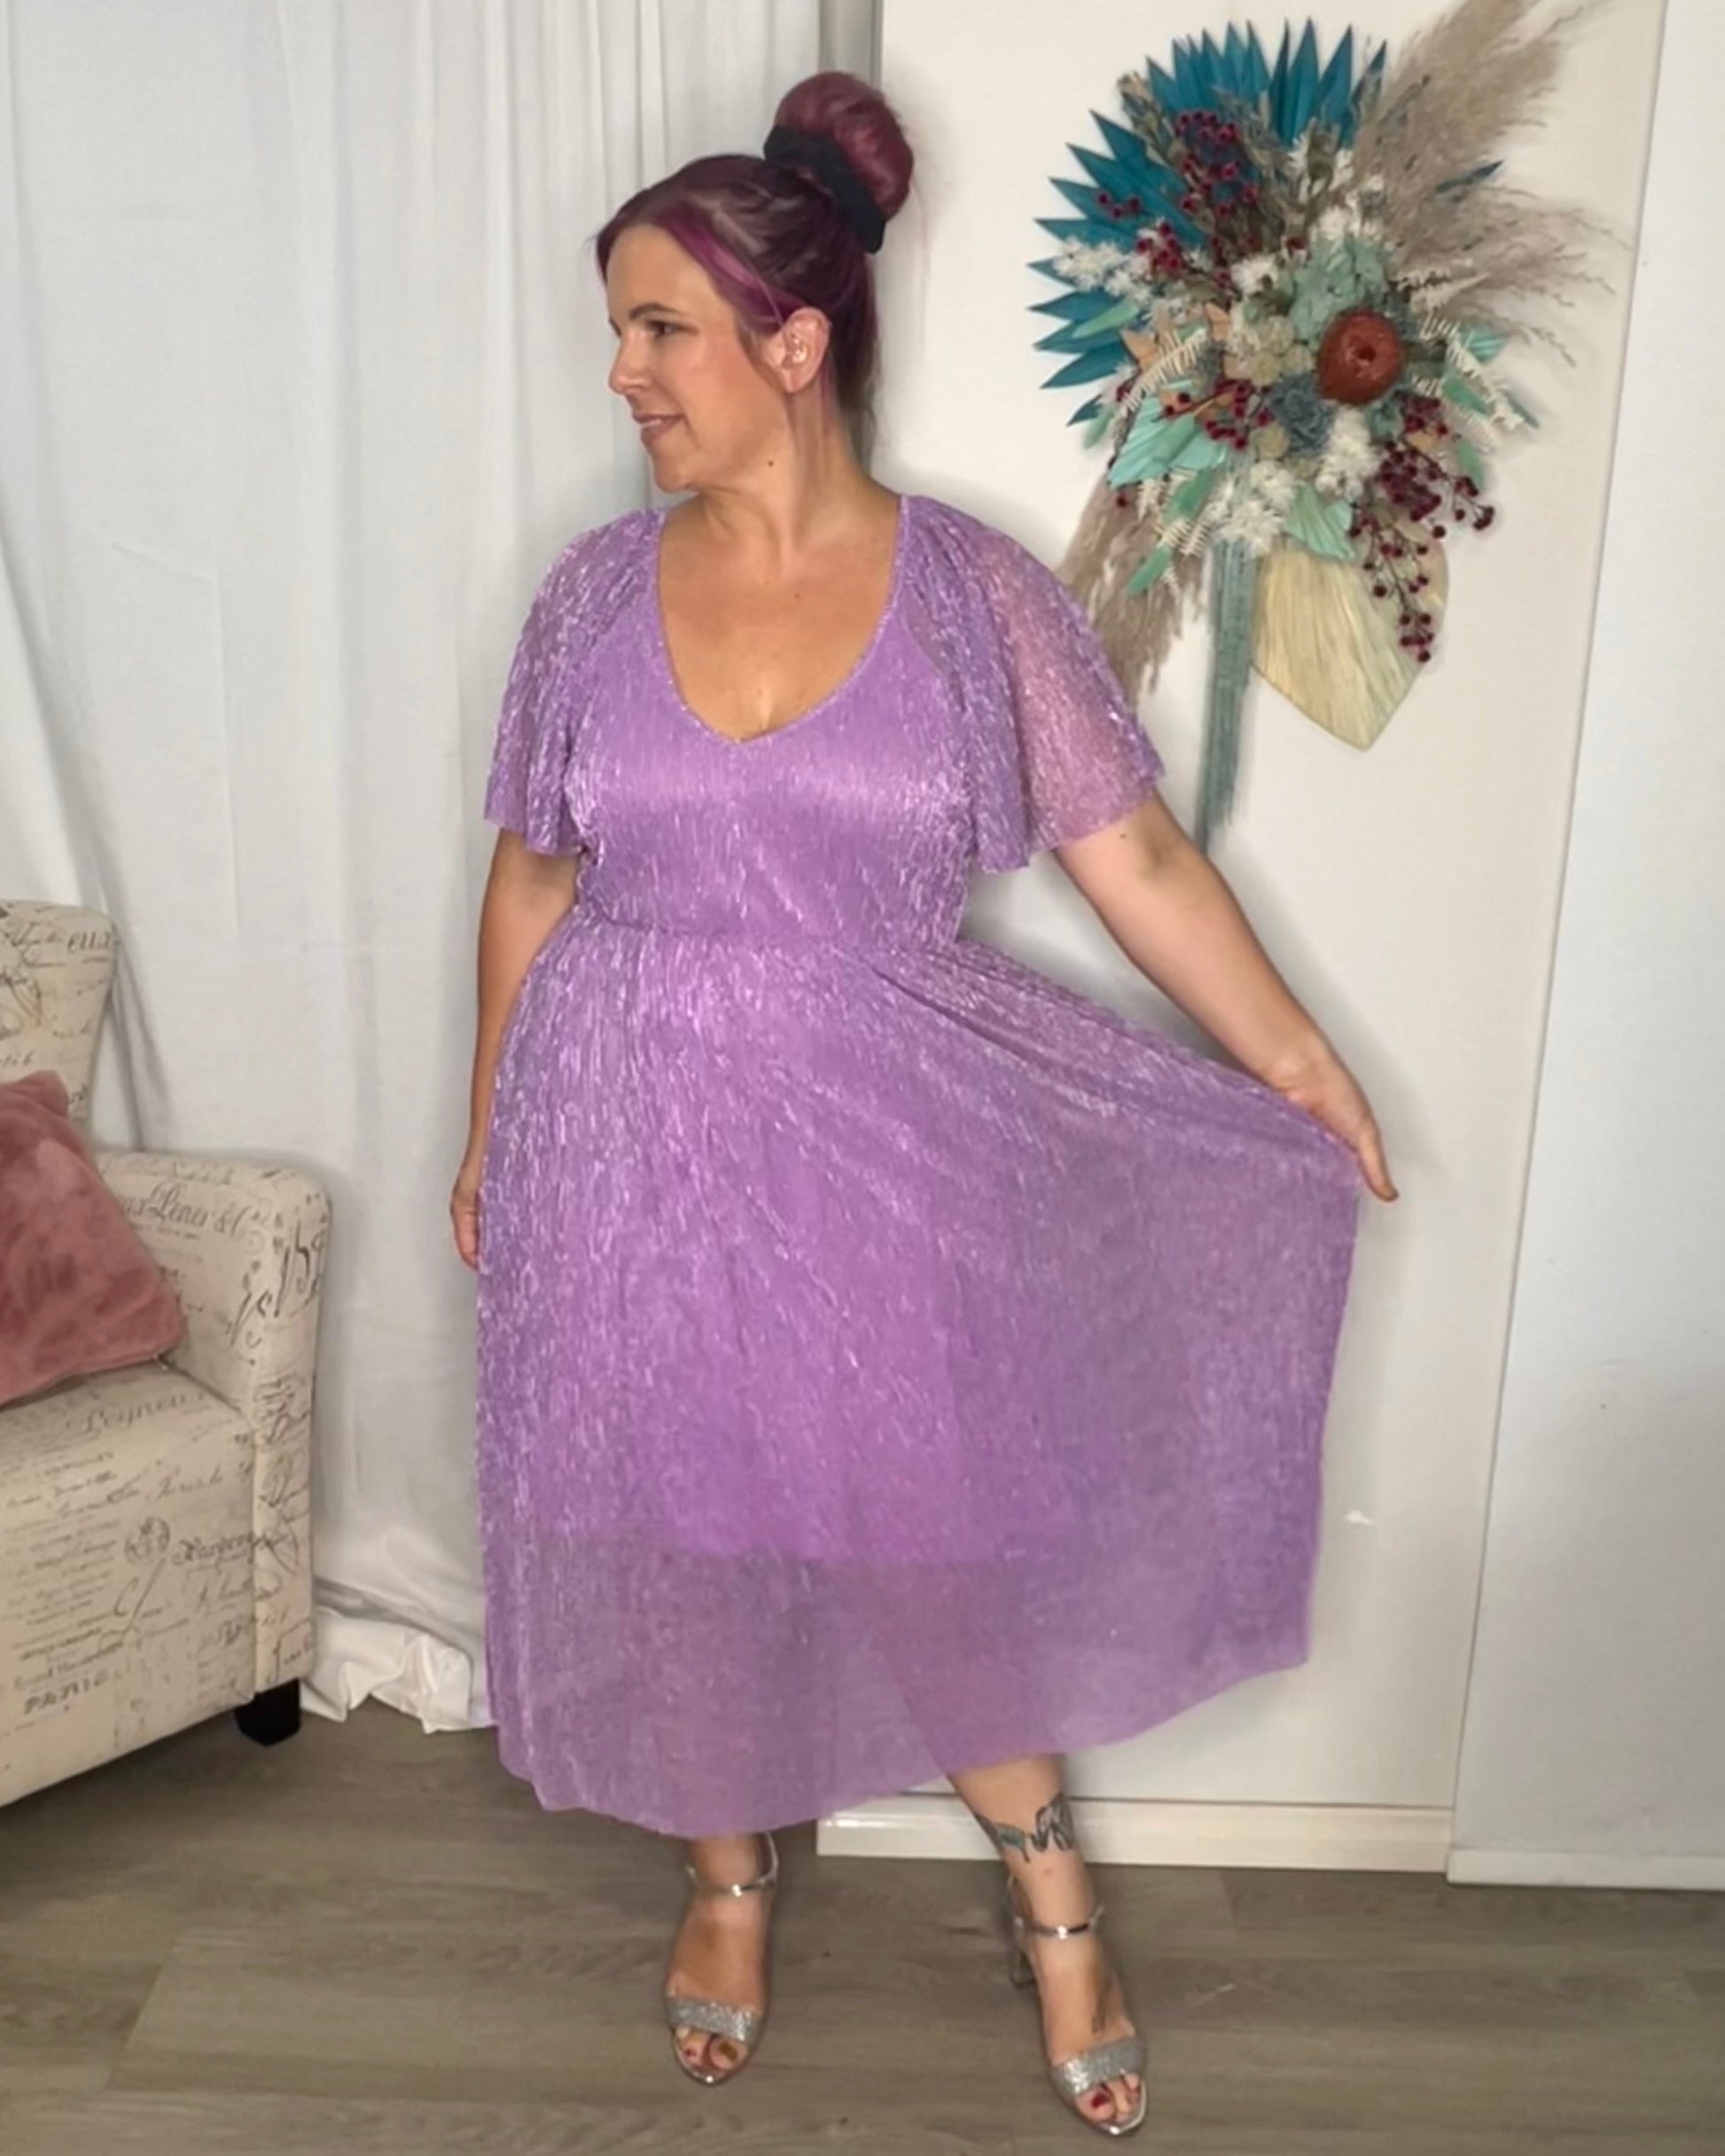 Nova Glitter Dress - Amethyst | Peach the Label | This limited edition Nova Dress is the perfect way to stand out at your next night out! Crafted from 100% Polyester and designed with a splash of sparkle, this dress